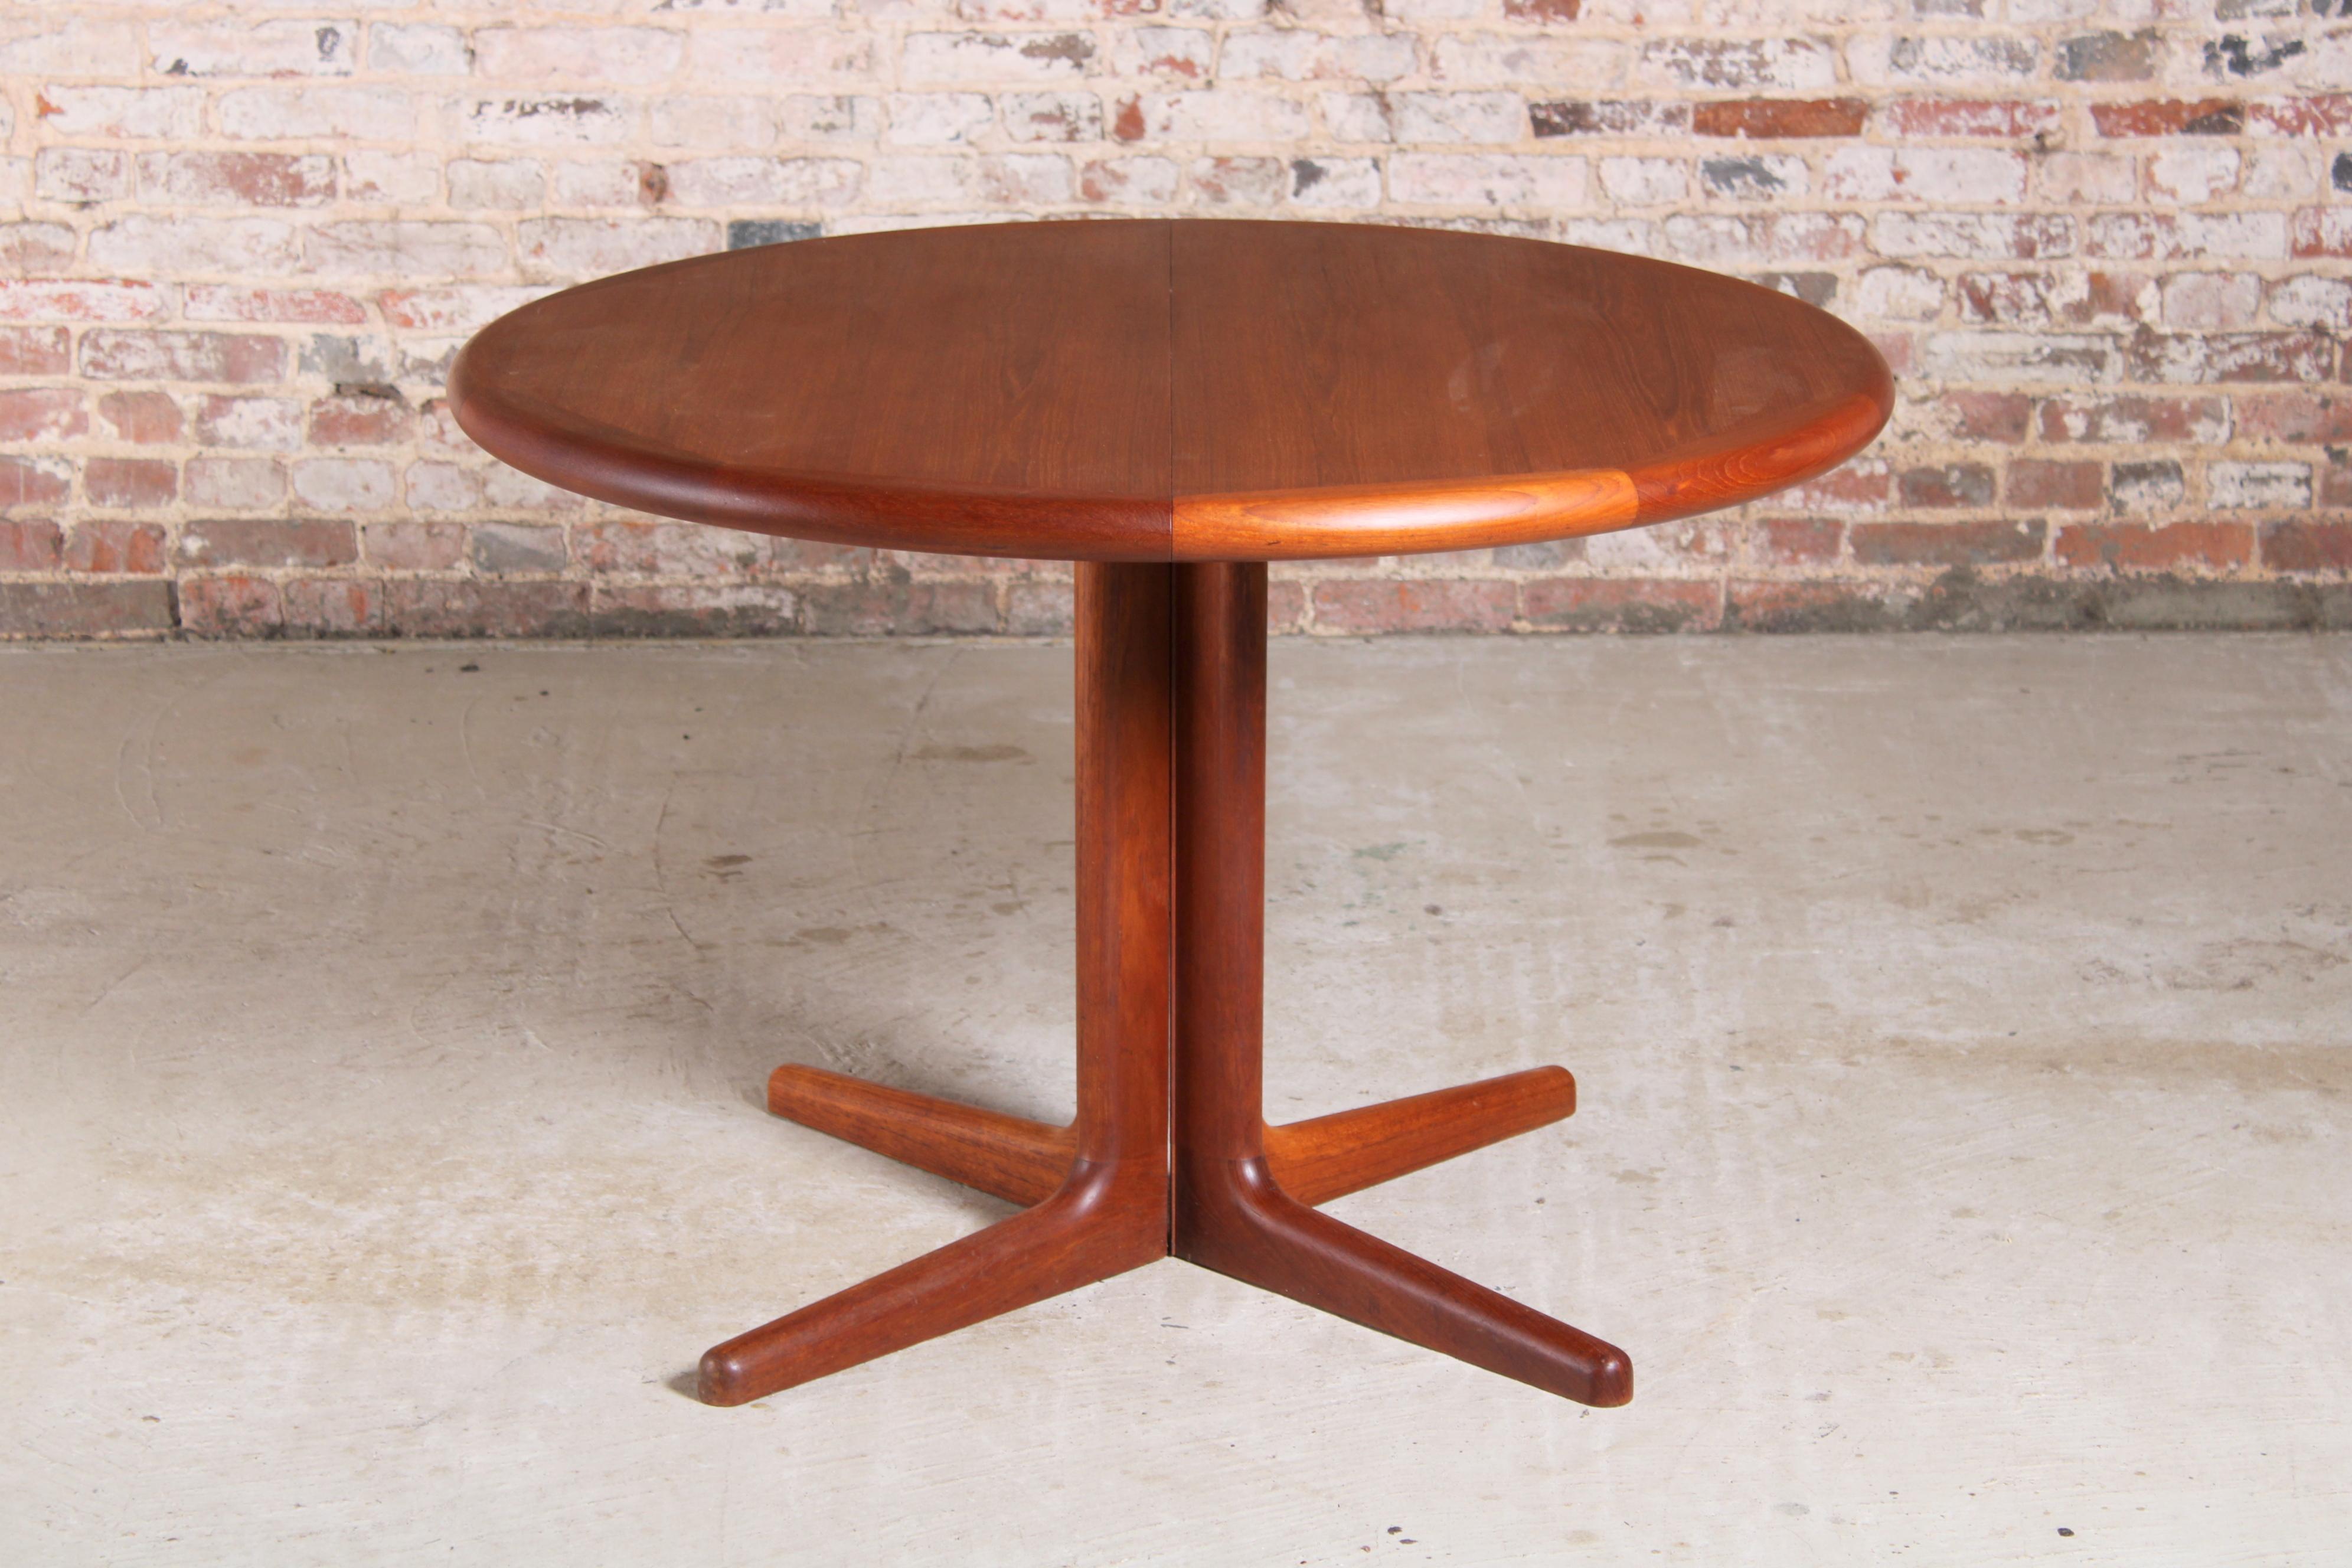 Danish Mid Century teak extending round dining table by Edvard Valentinsen, circa 1960s. Extends up to 158cm to seat 6 people. Fully restored.

Dimensions: W 108/158 x D 108 x H 72 cm.